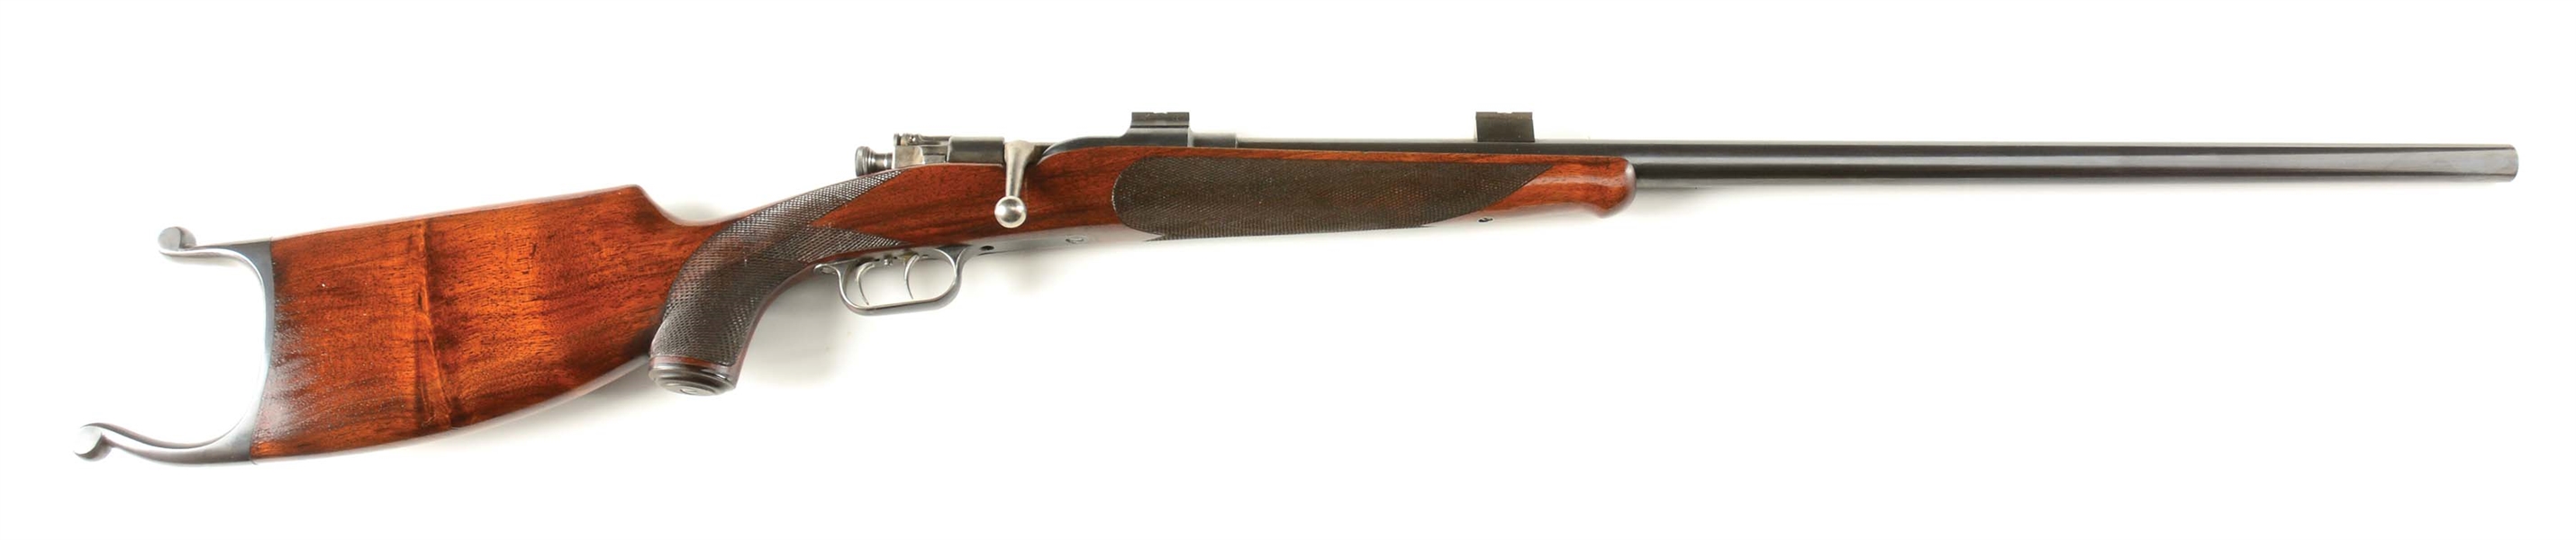 (C) HISTORICALLY IMPORTANT, EXCEEDINGLY RARE (SERIAL NUMBER 2 OF AN ESTIMATED 6 PRODUCED) MODEL 1913 MANN-NIEDNER BOLT ACTION OFF HAND TARGET RIFLE.